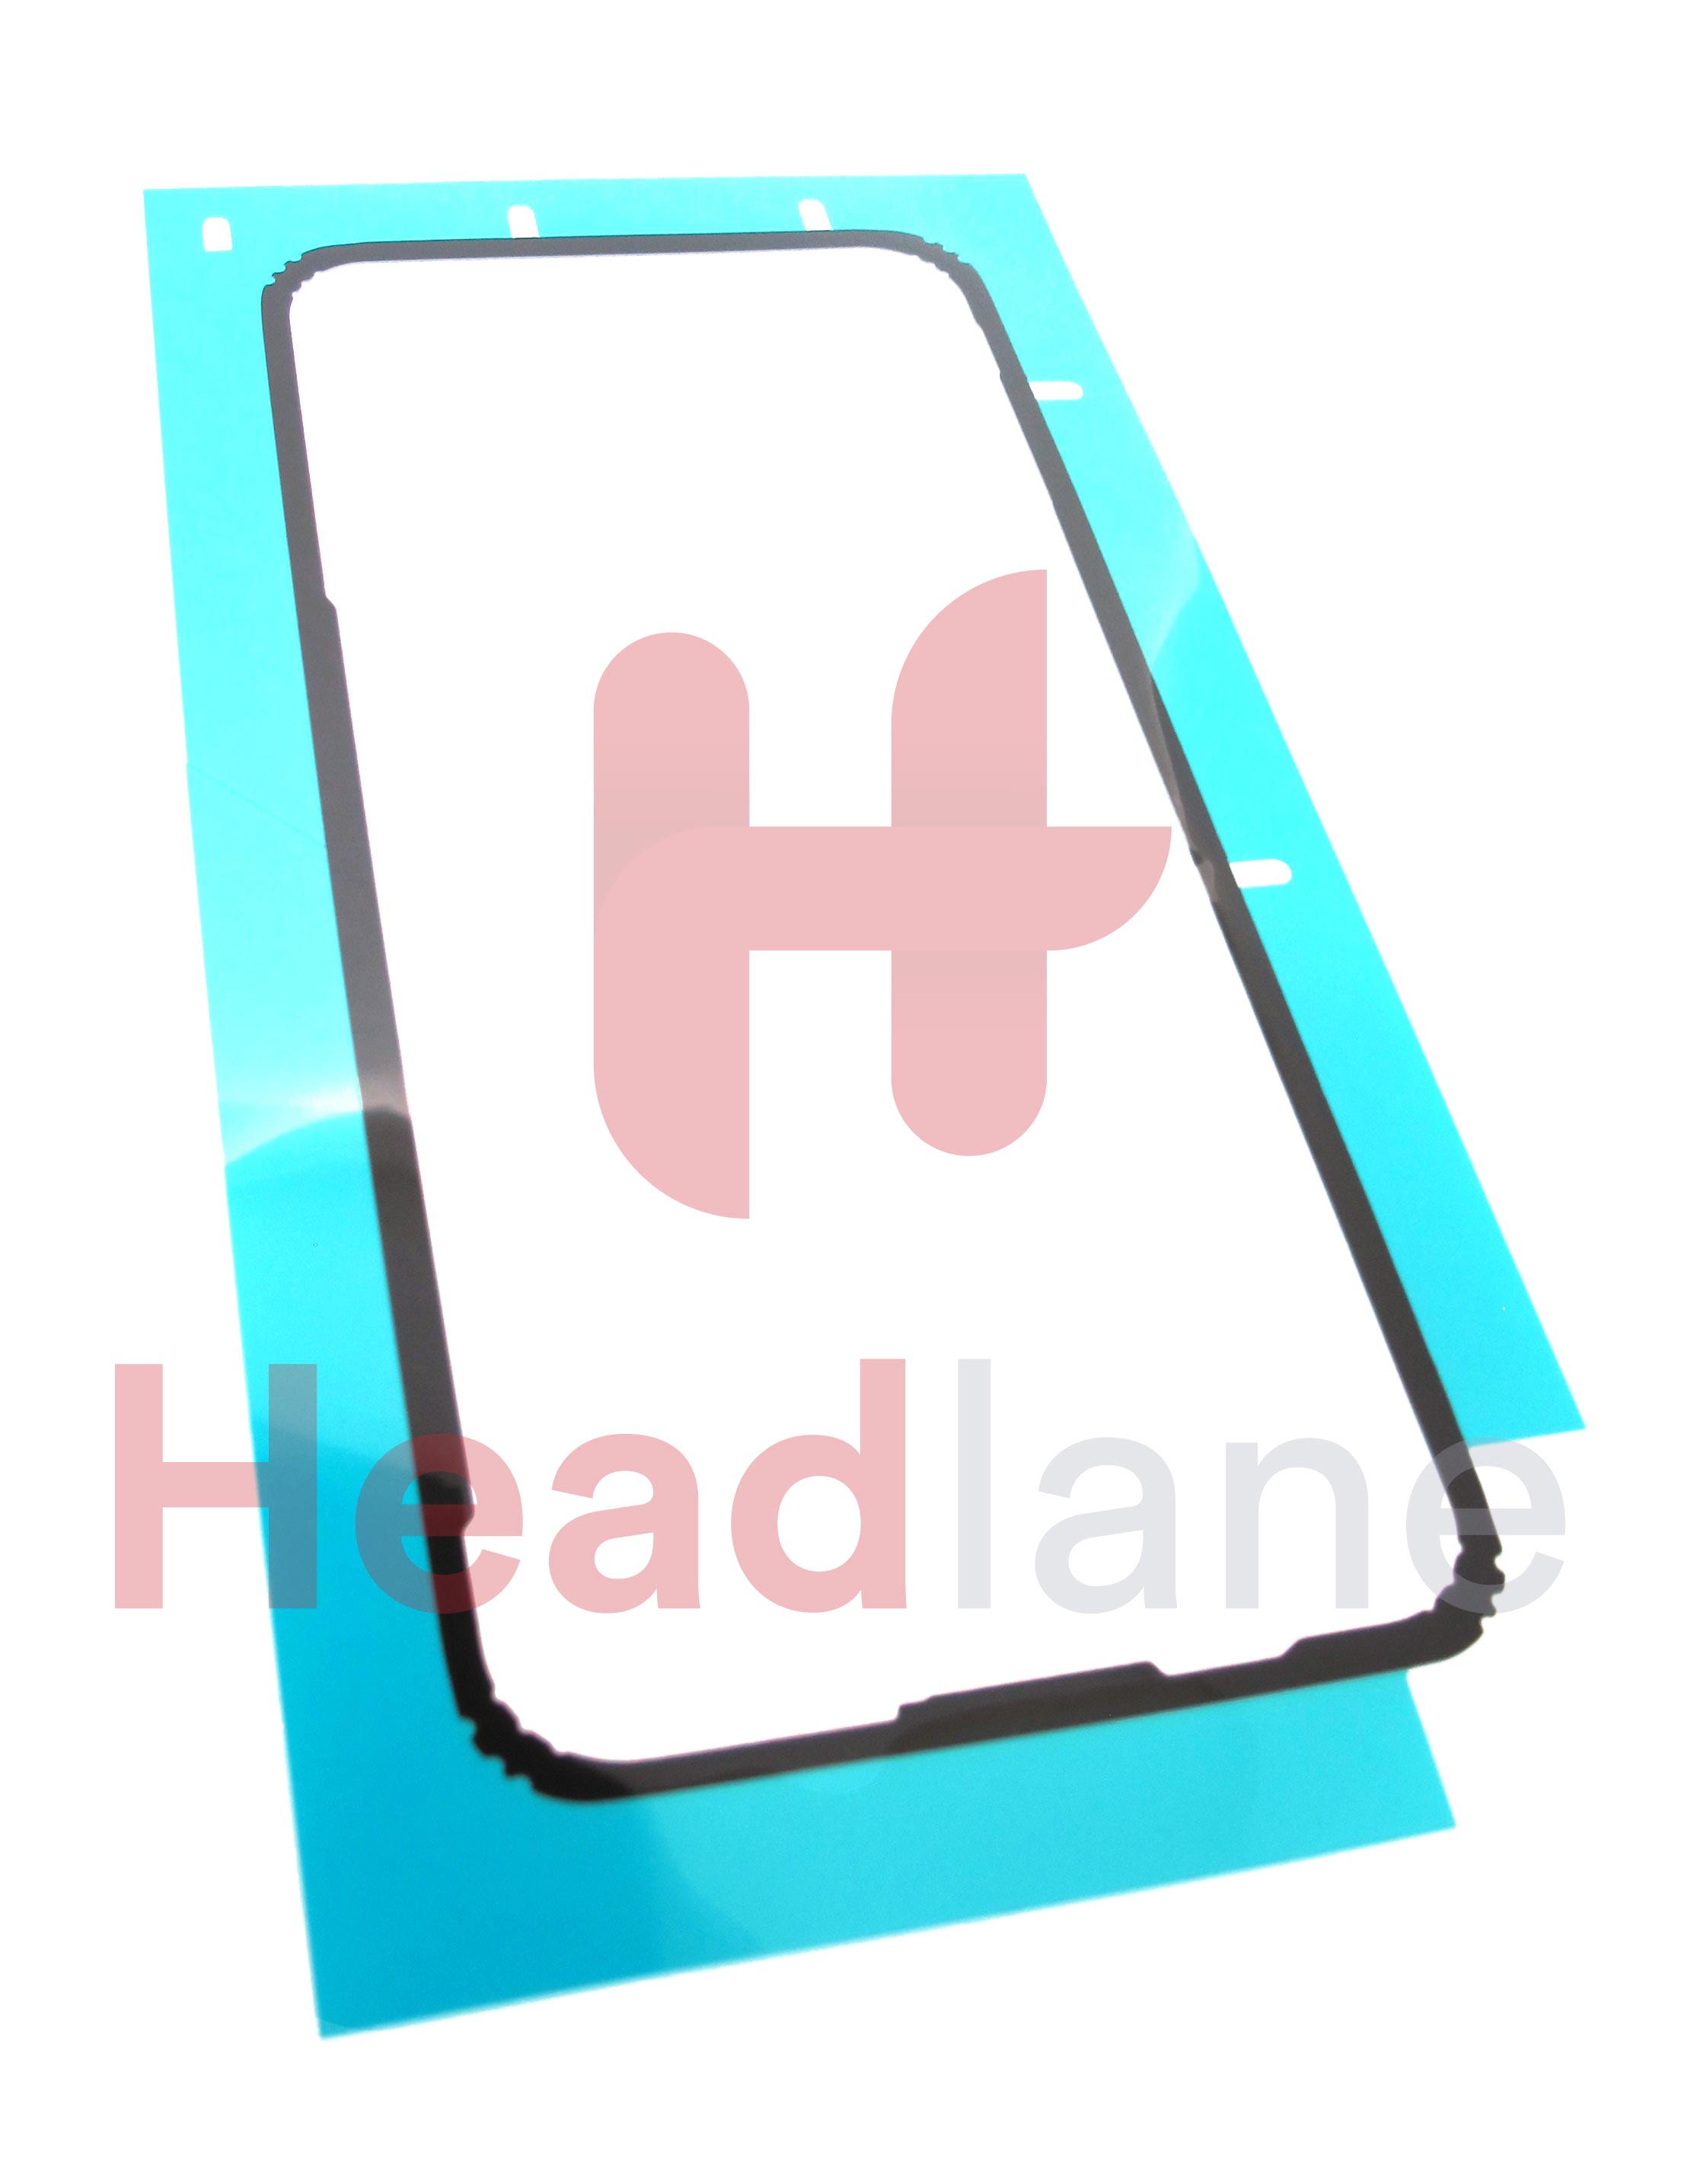 Huawei P20 Pro Back / Battery Cover Adhesive